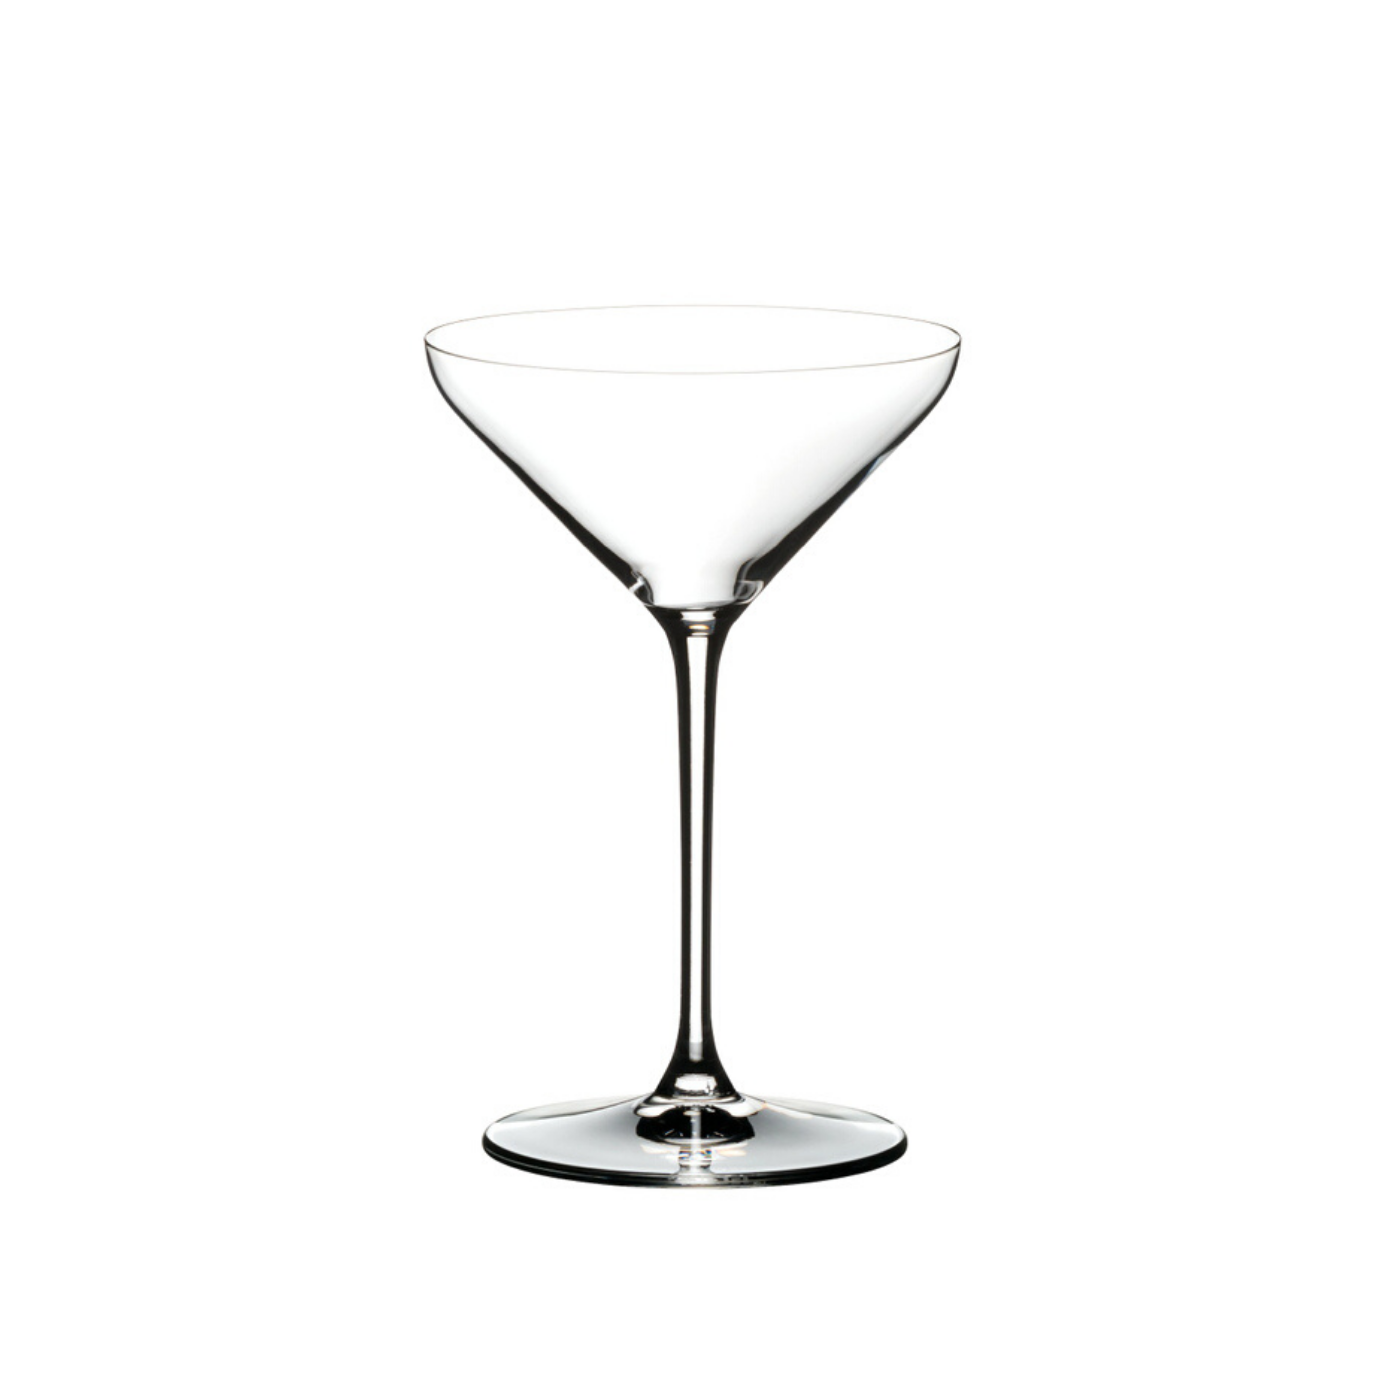 Riedel Extreme Crystal Martini Glasses (set of 2)